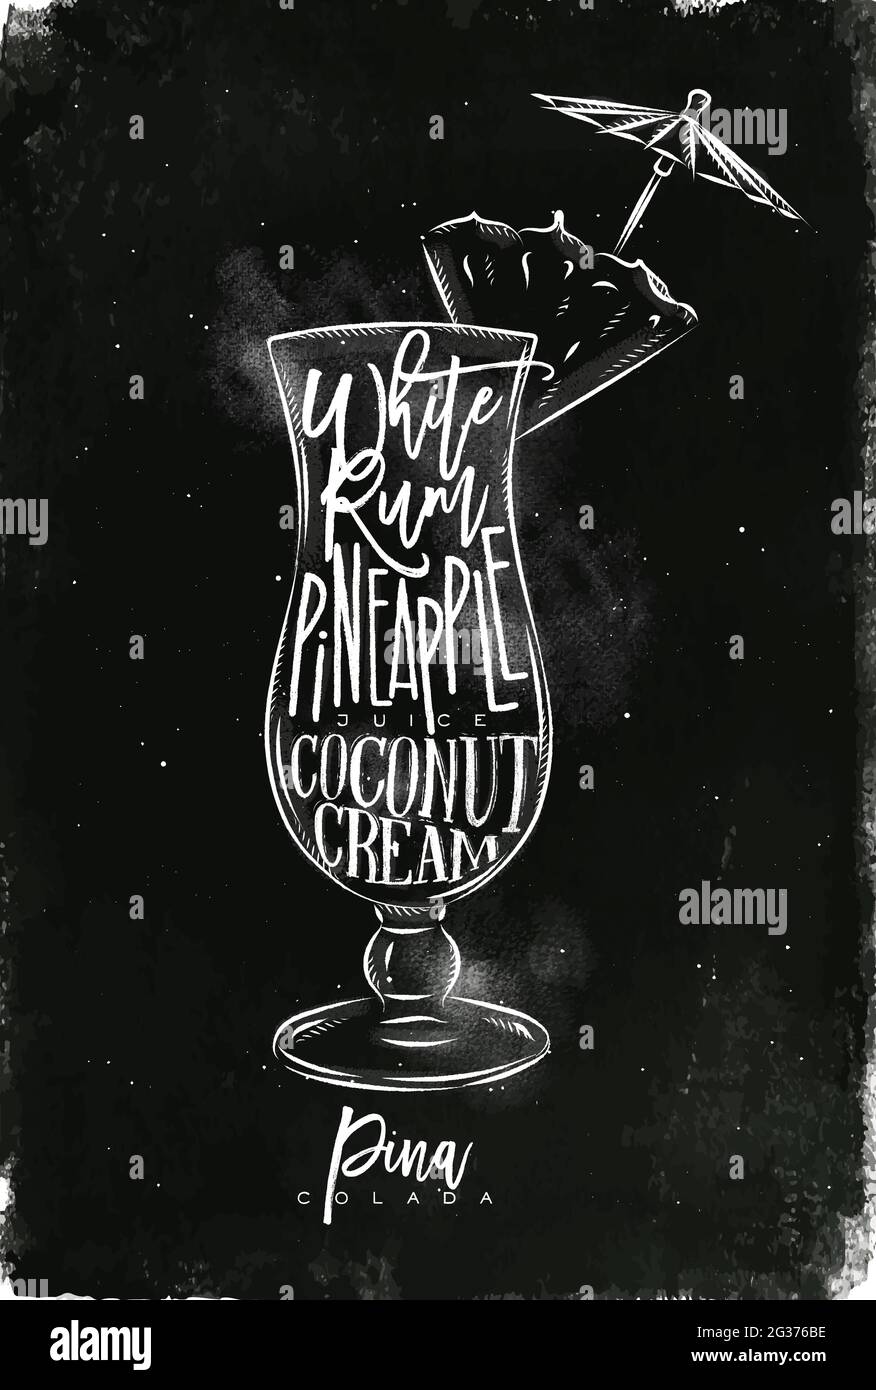 Pina colada cocktail lettering white rum, pinapple juice, coconut cream in vintage graphic style drawing with chalk on chalkboard background Stock Vector